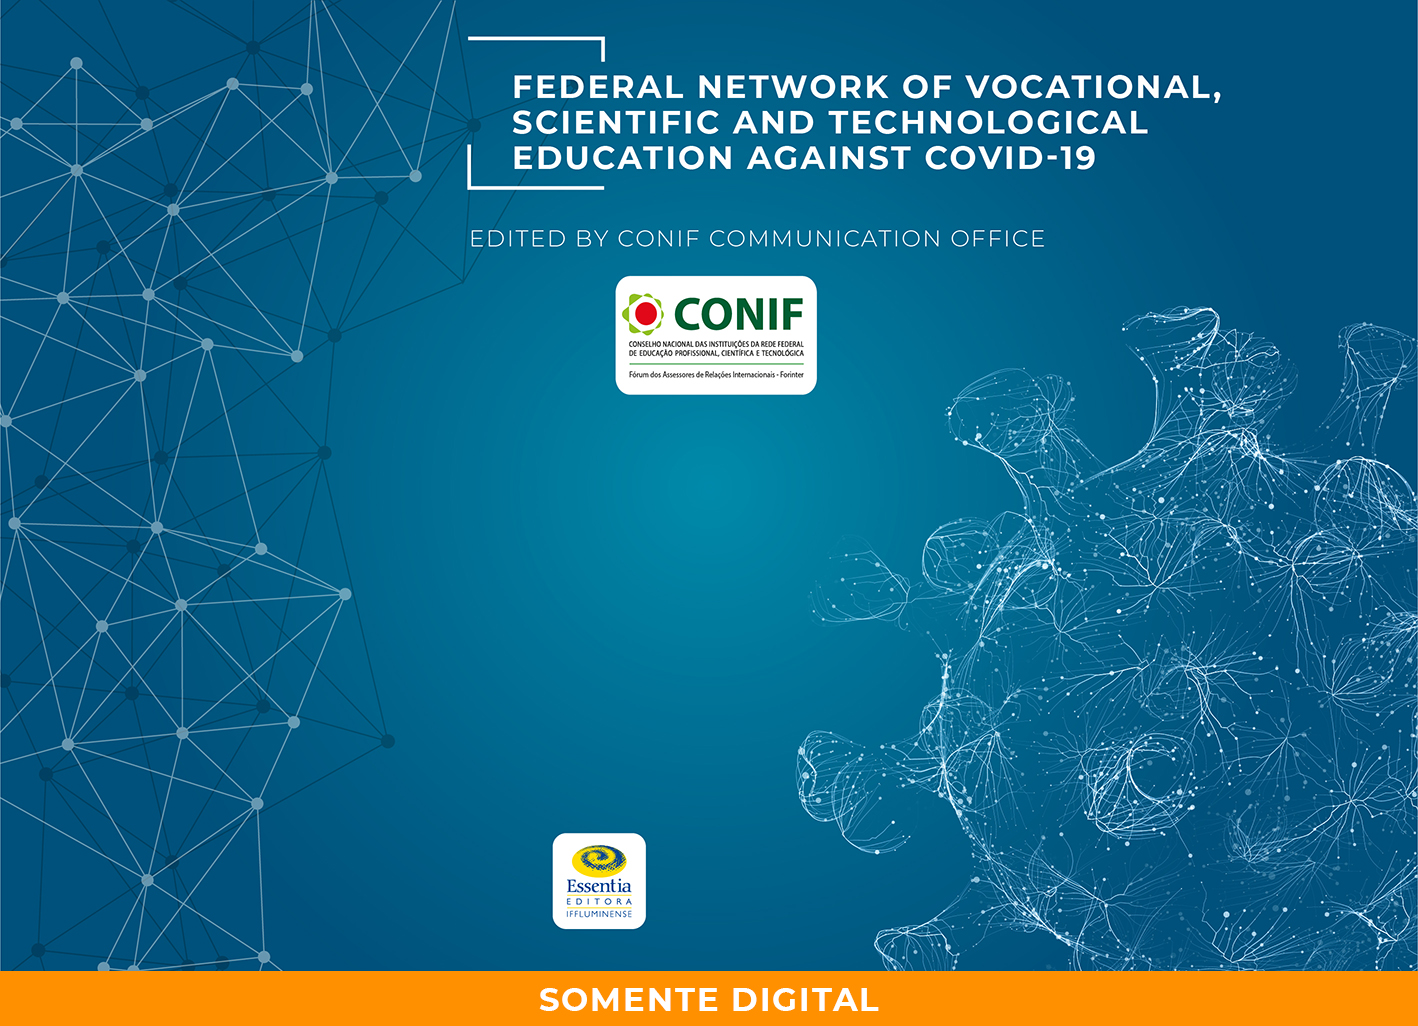 					View 2020: Federal network of vocational, scientific and technological education against Covid-19
				